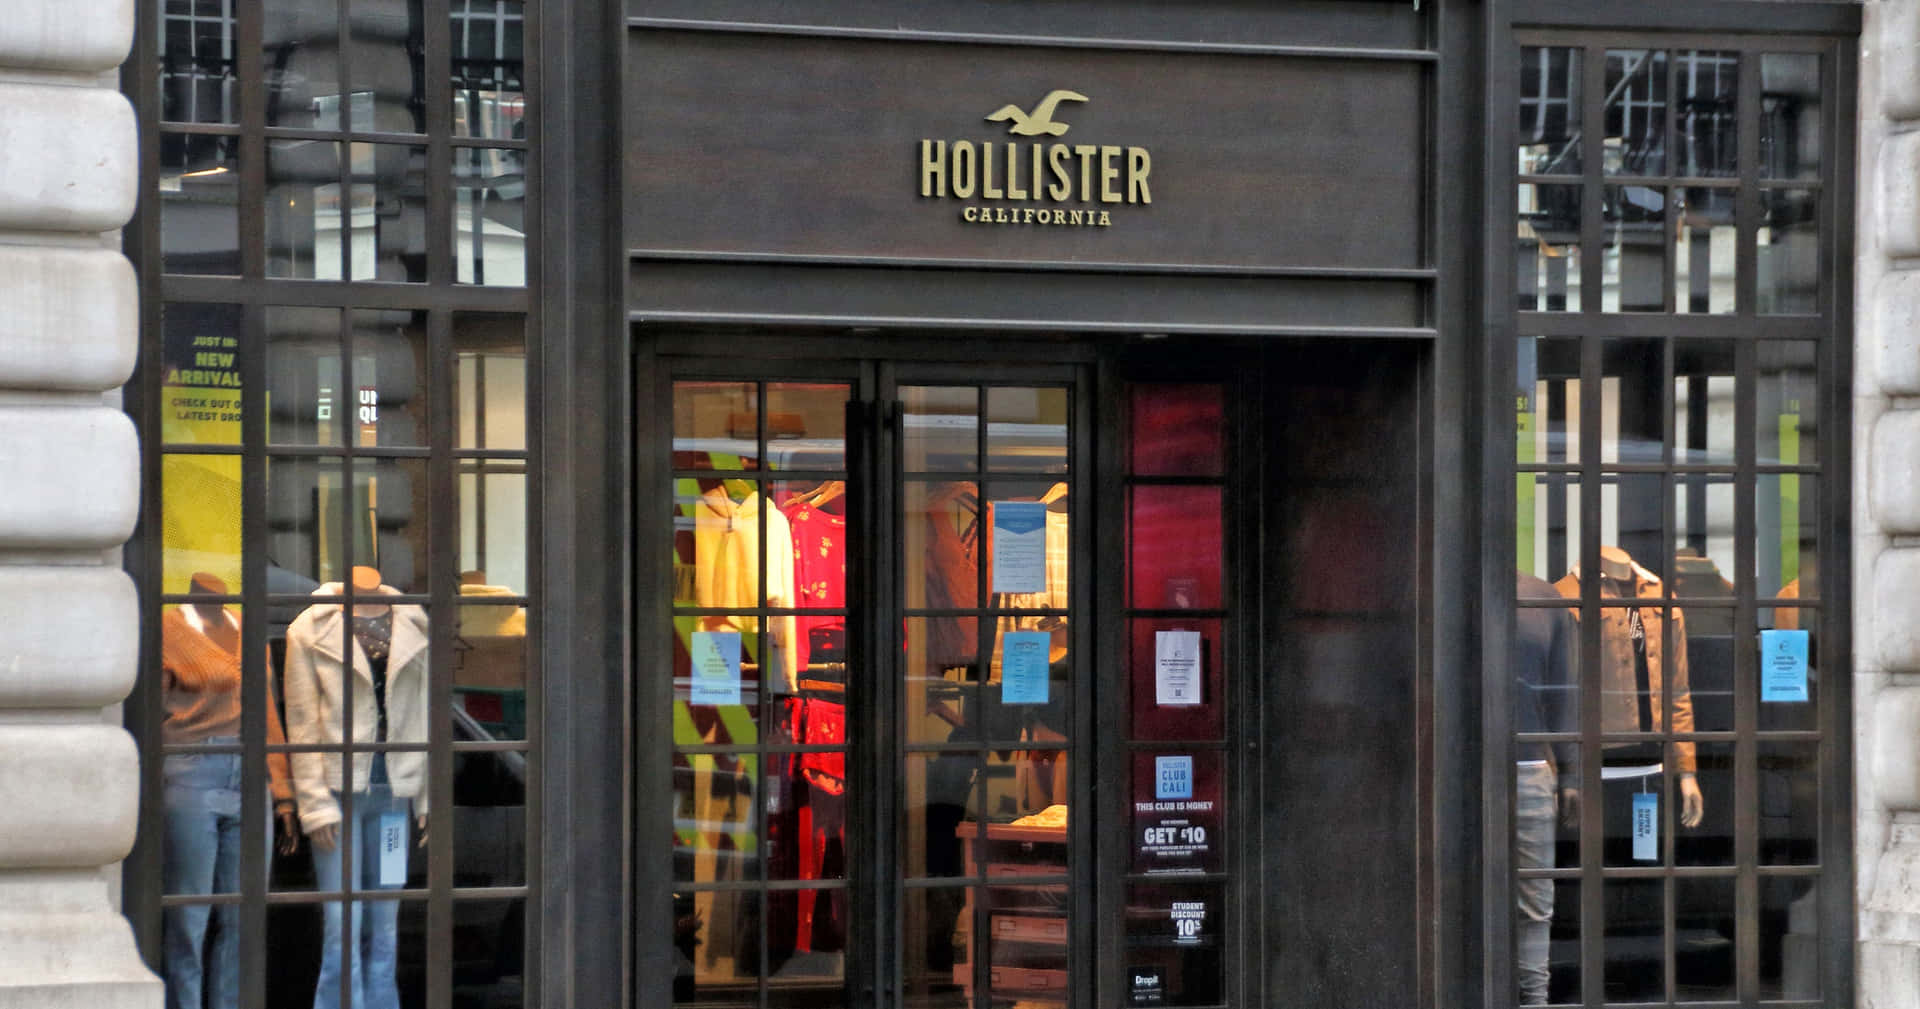 Feel the California Vibe with Hollister